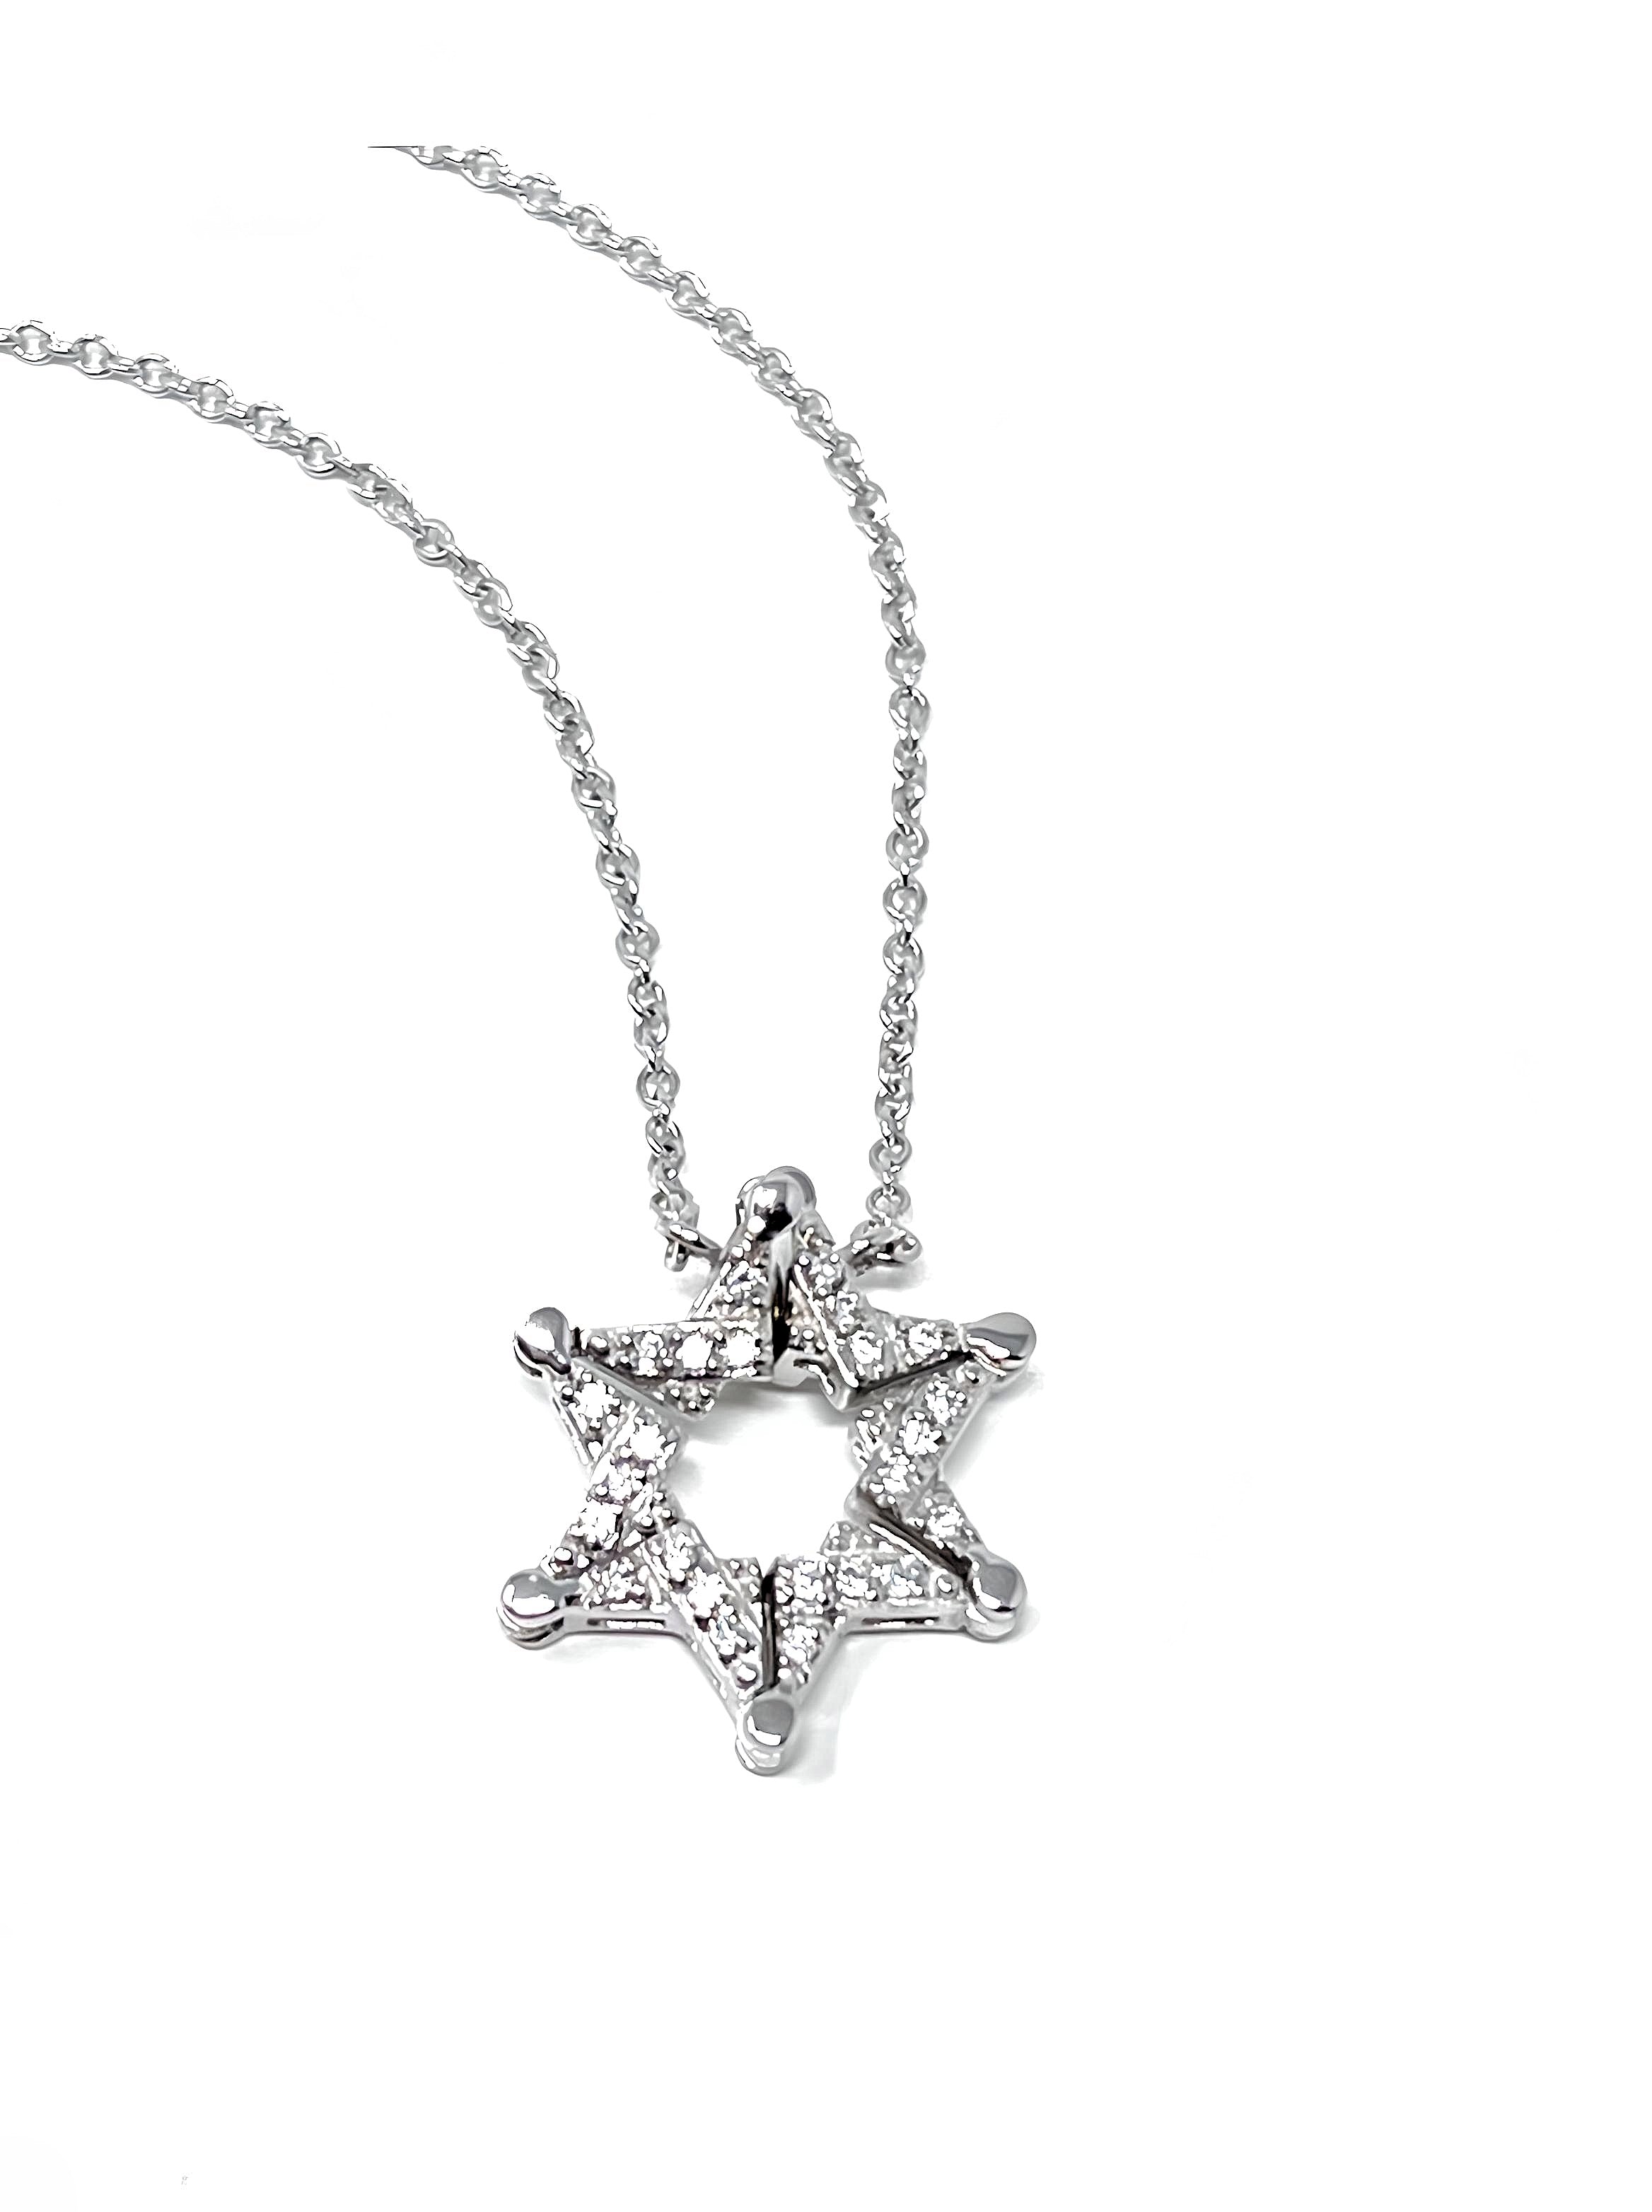 Amazon.com: Butterfly Star of David Necklace, Reversible Necklace 925  Sterling Silver Pendant with Jewish Star Symbol, Israeli Made Hebrew  Israelite,Jewish Jewelry, Kabbalah, Jewis (tree of life/ star of david,  black,white,gold/ light pink) :